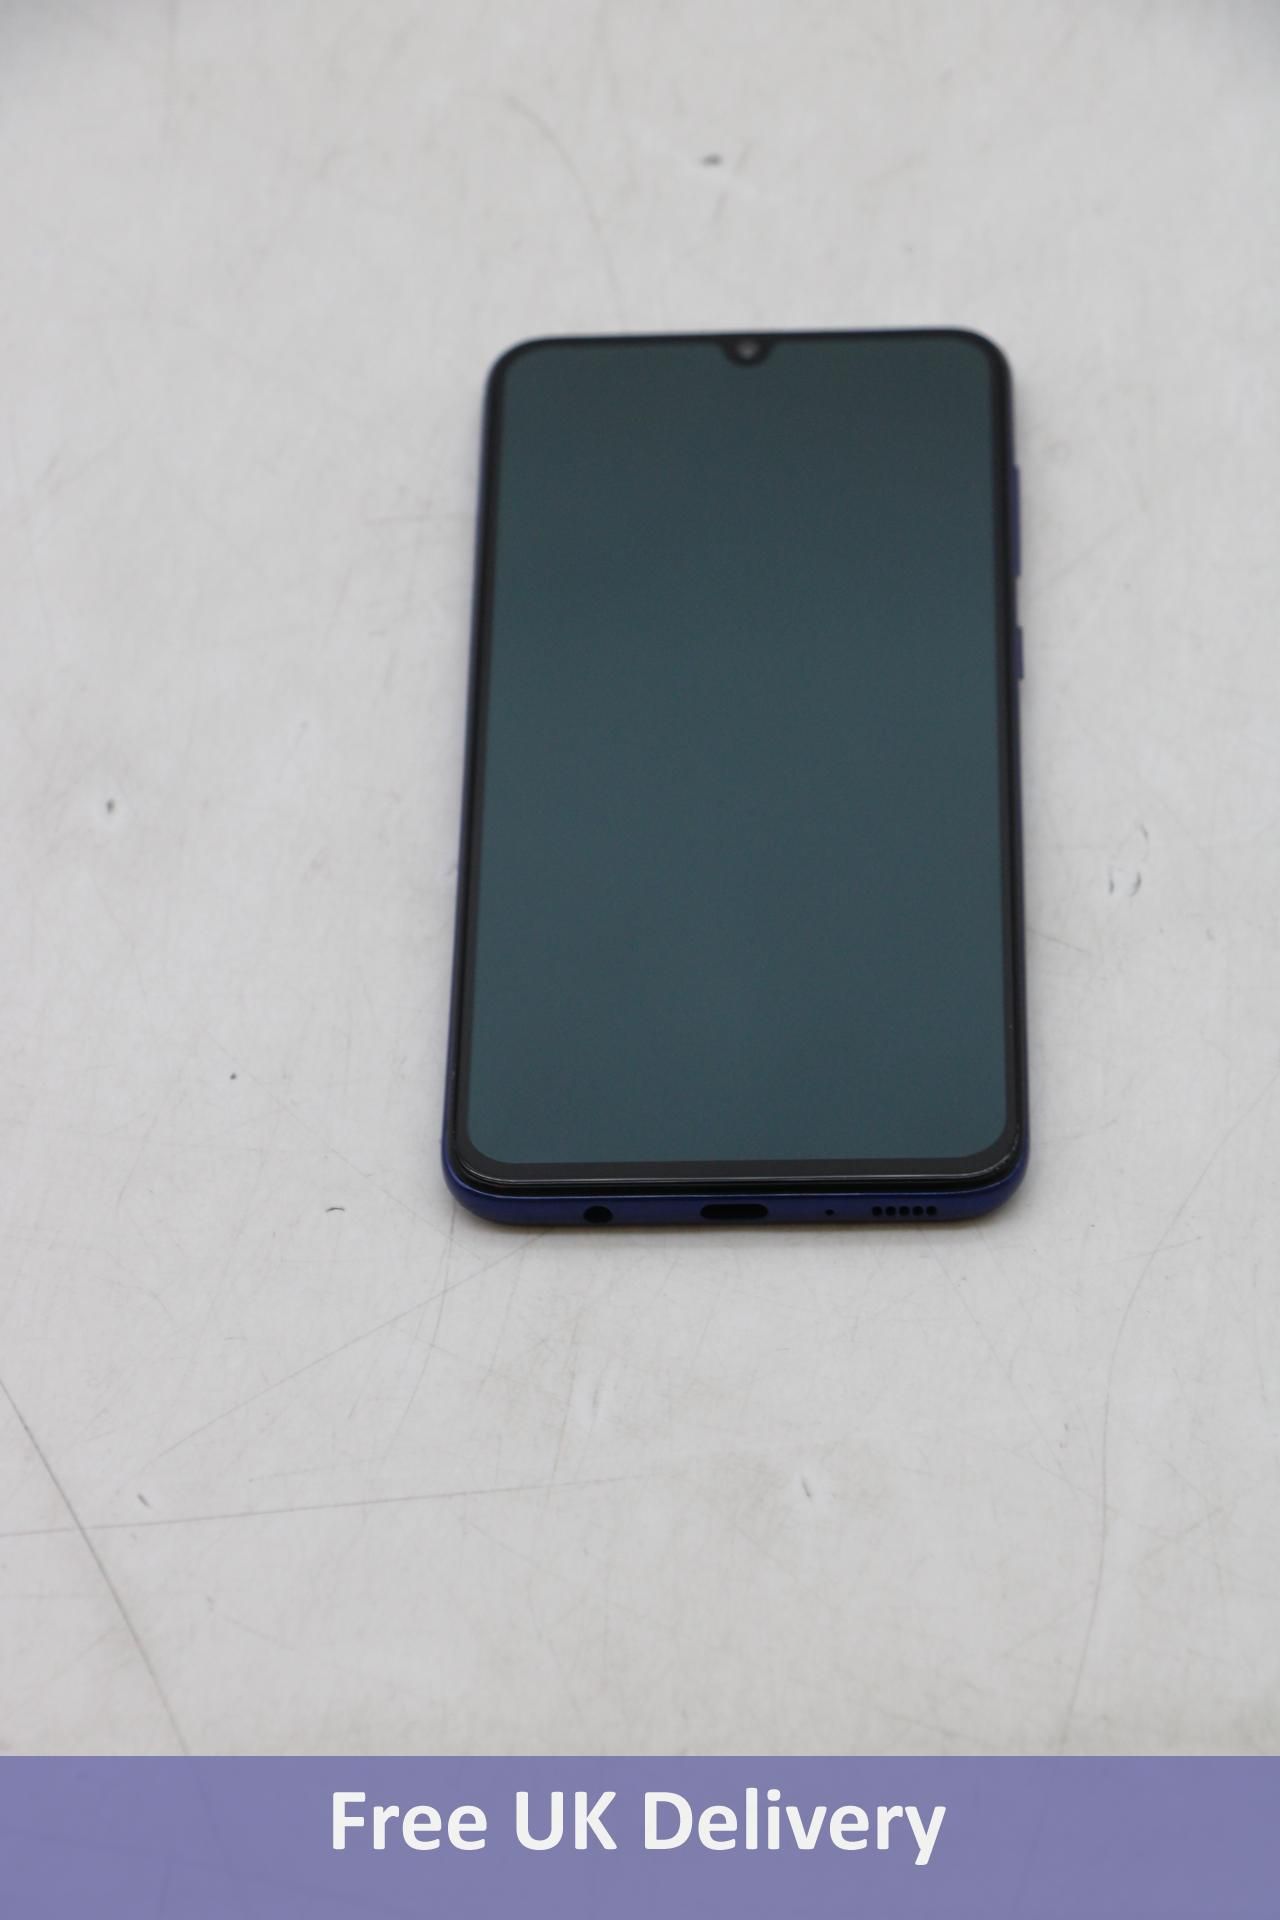 Samsung Galaxy A70 Android Mobile Phone, SM-A705FN/DS 6GB, 128GB, Blue. Used, No box or accessories,